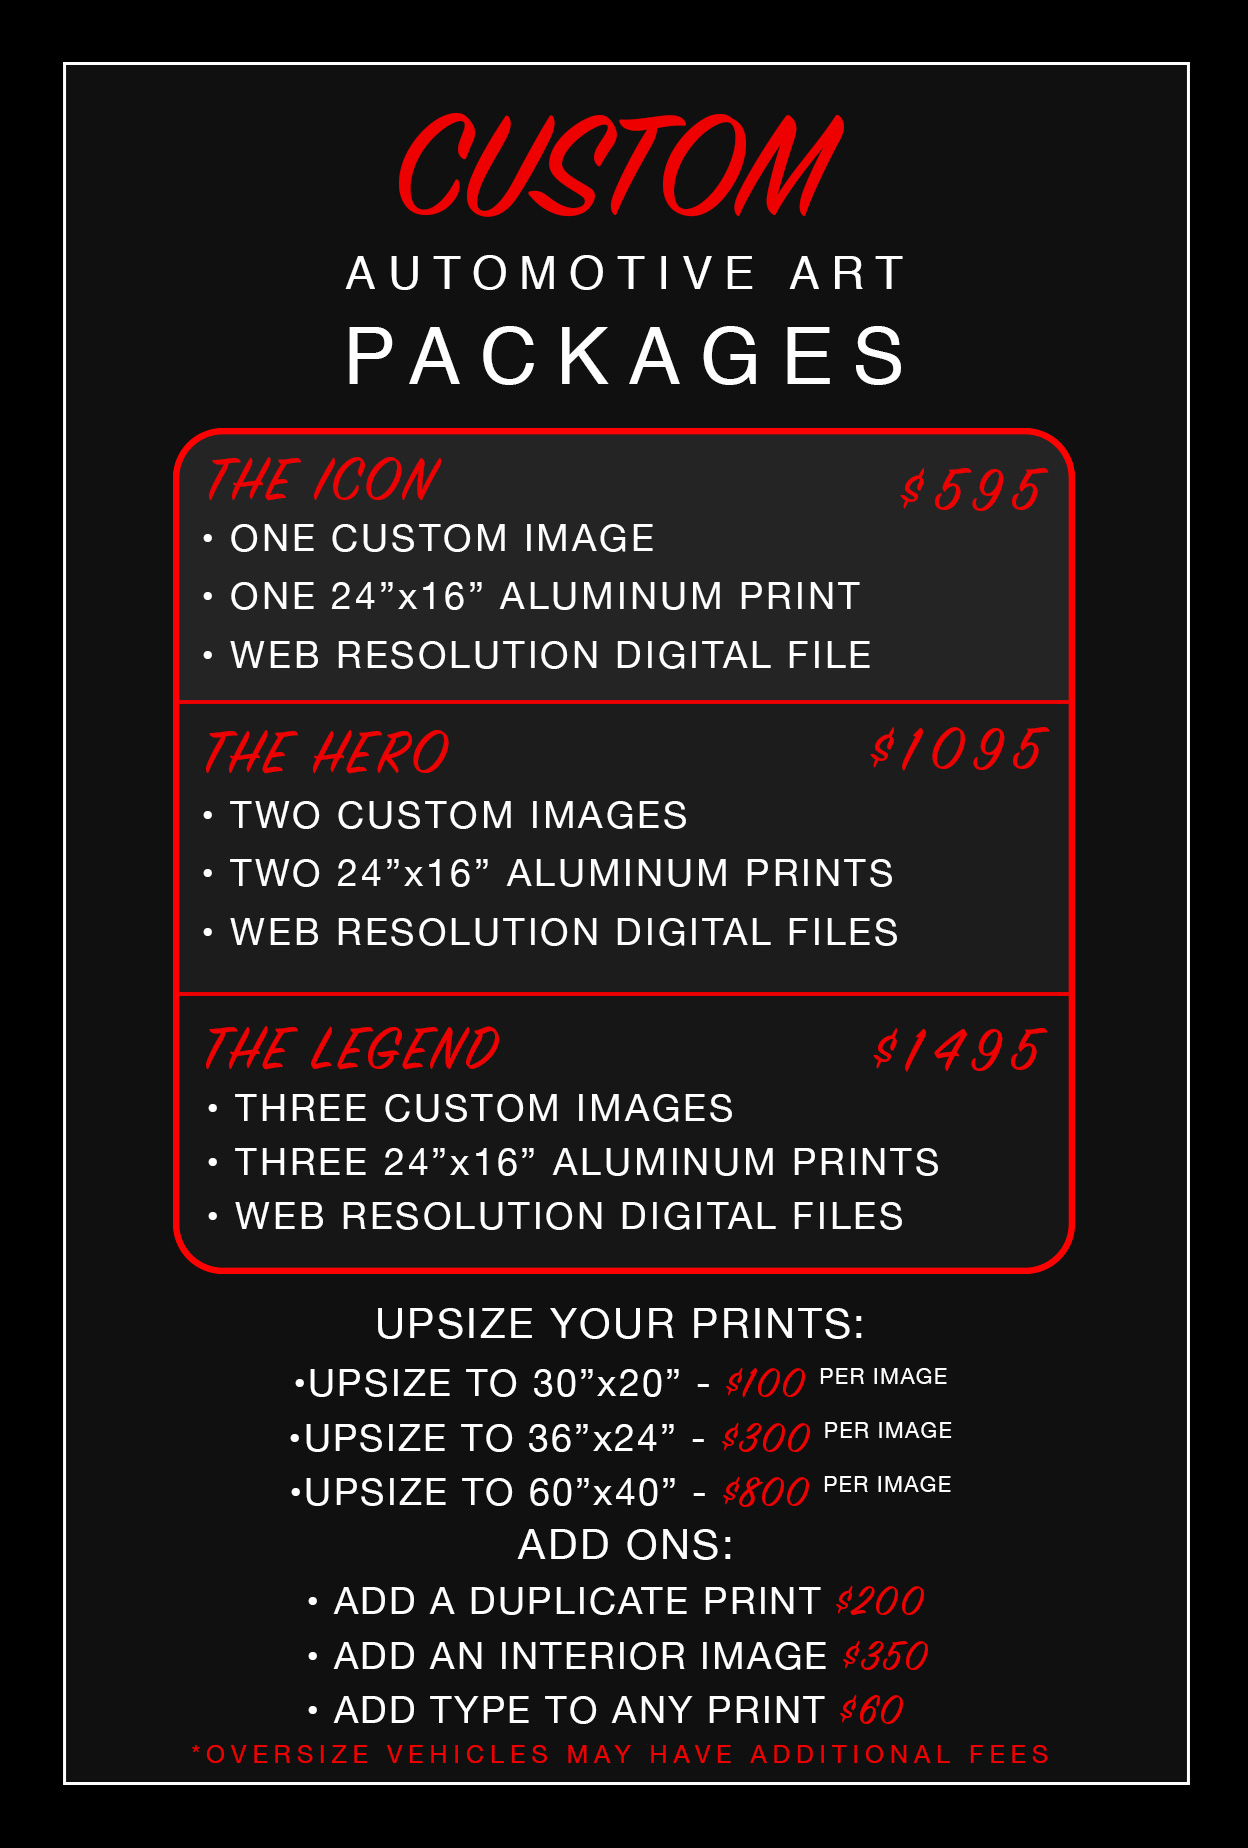 Auto_Art_Packages